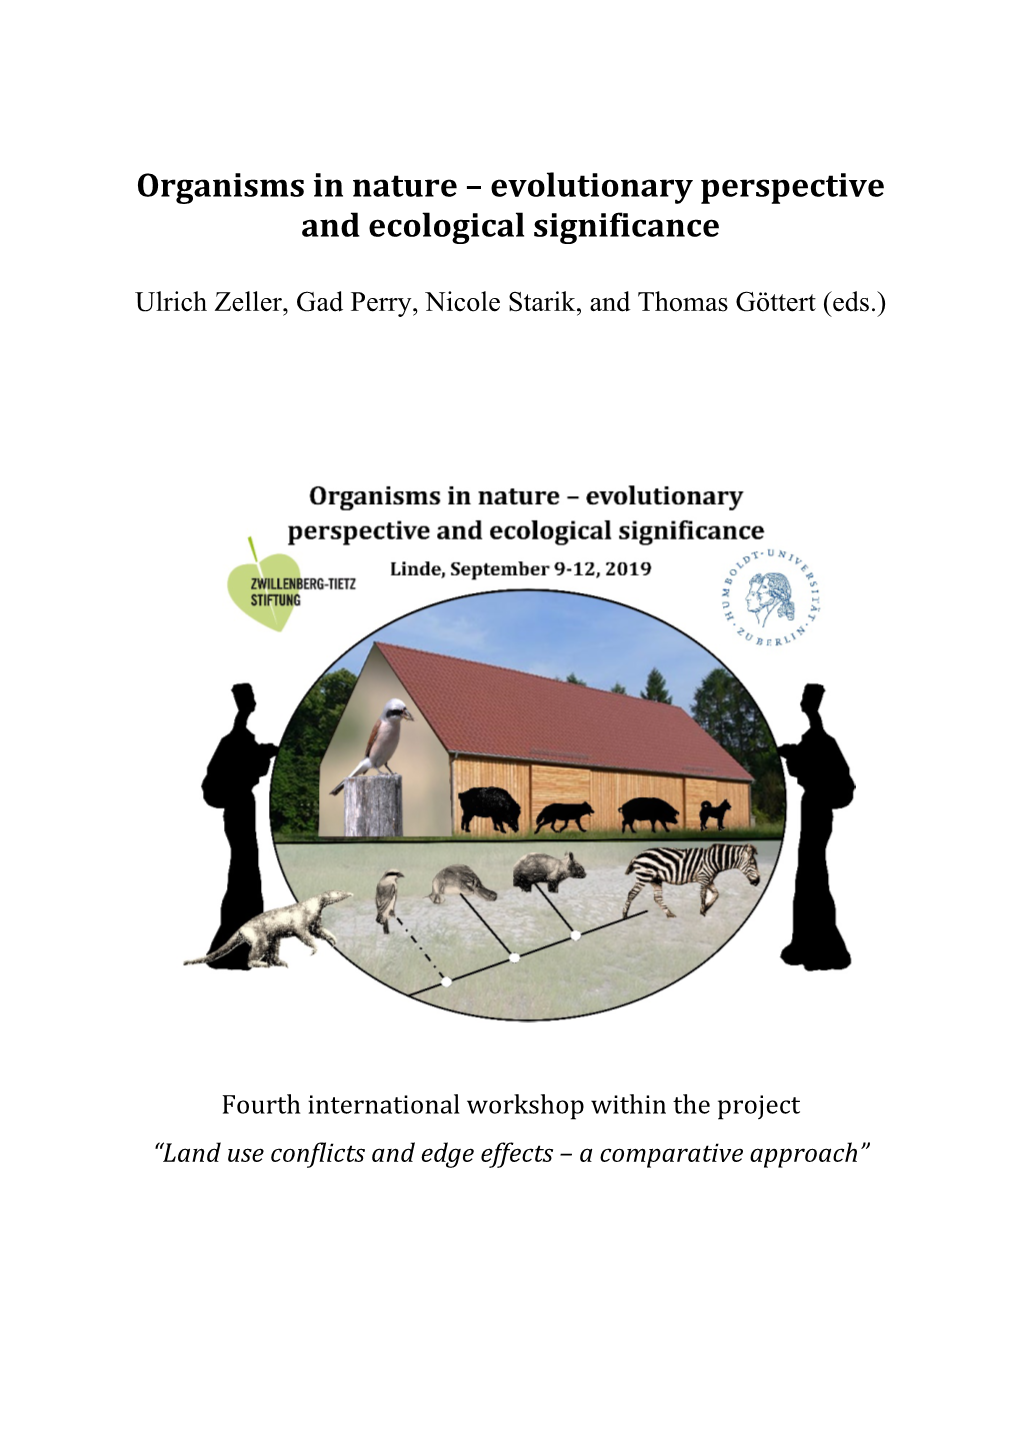 Evolutionary Perspective and Ecological Significance